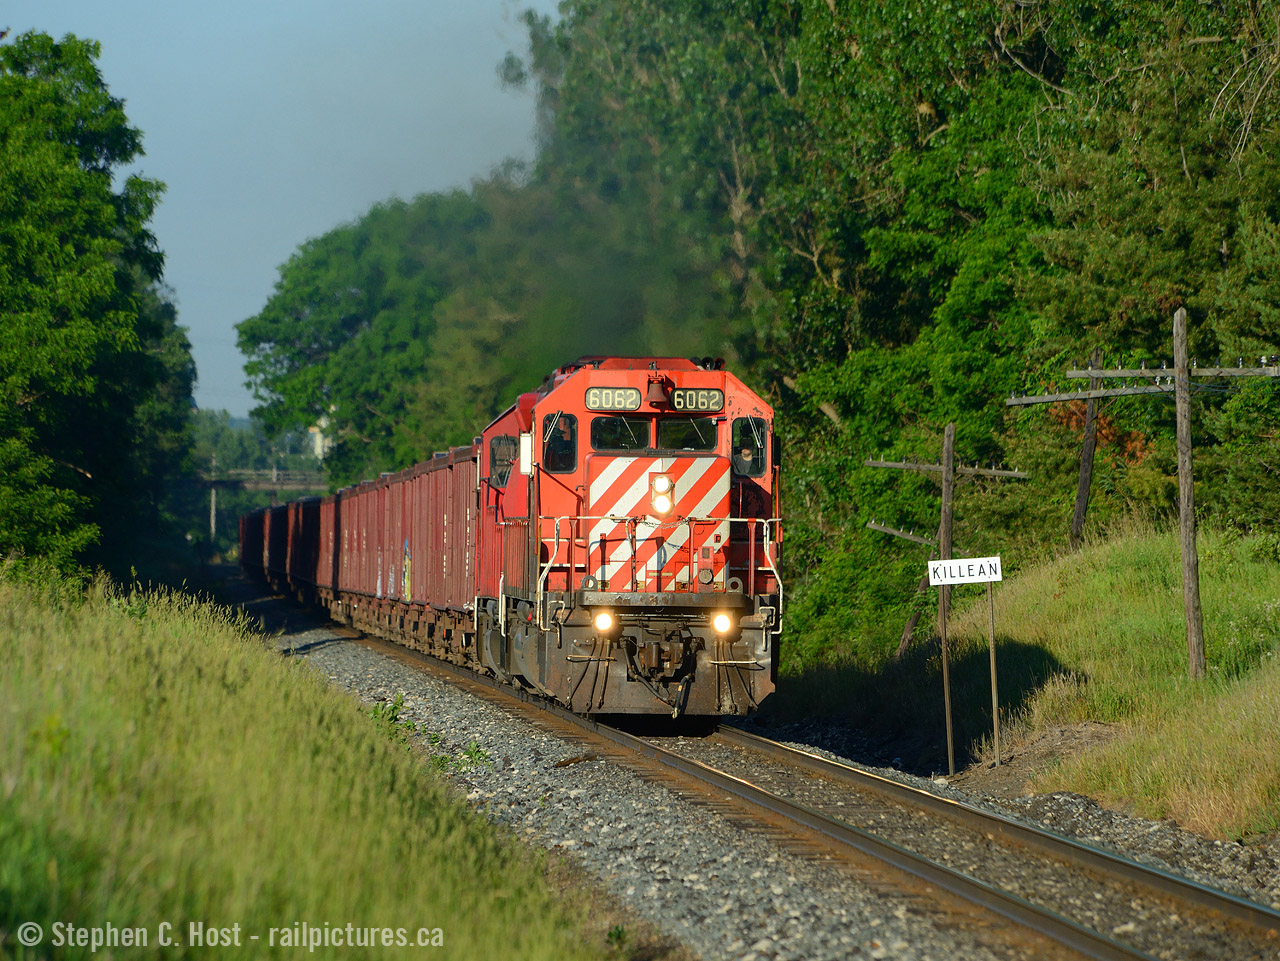 The time is 0724 and CP 6062 has the early morning light glowing on its action red stripes as a Herzog ballast train blasts by to load in Sudbury. Wasting no time, the hogger of this train averaged 49 MPH between London and Guelph Junction, chasing was a futile effort, but bagging one of these in 2018 was not.
Action red stripes leading in 2018 is a very rare thing - there are three GP38-2's in this paint scheme that are active, and maybe a small handful of re-activated SD40-2's so finding action red on the point, once common, is now almost a lottery draw. It was also nearly 5 years since my last  photo here.